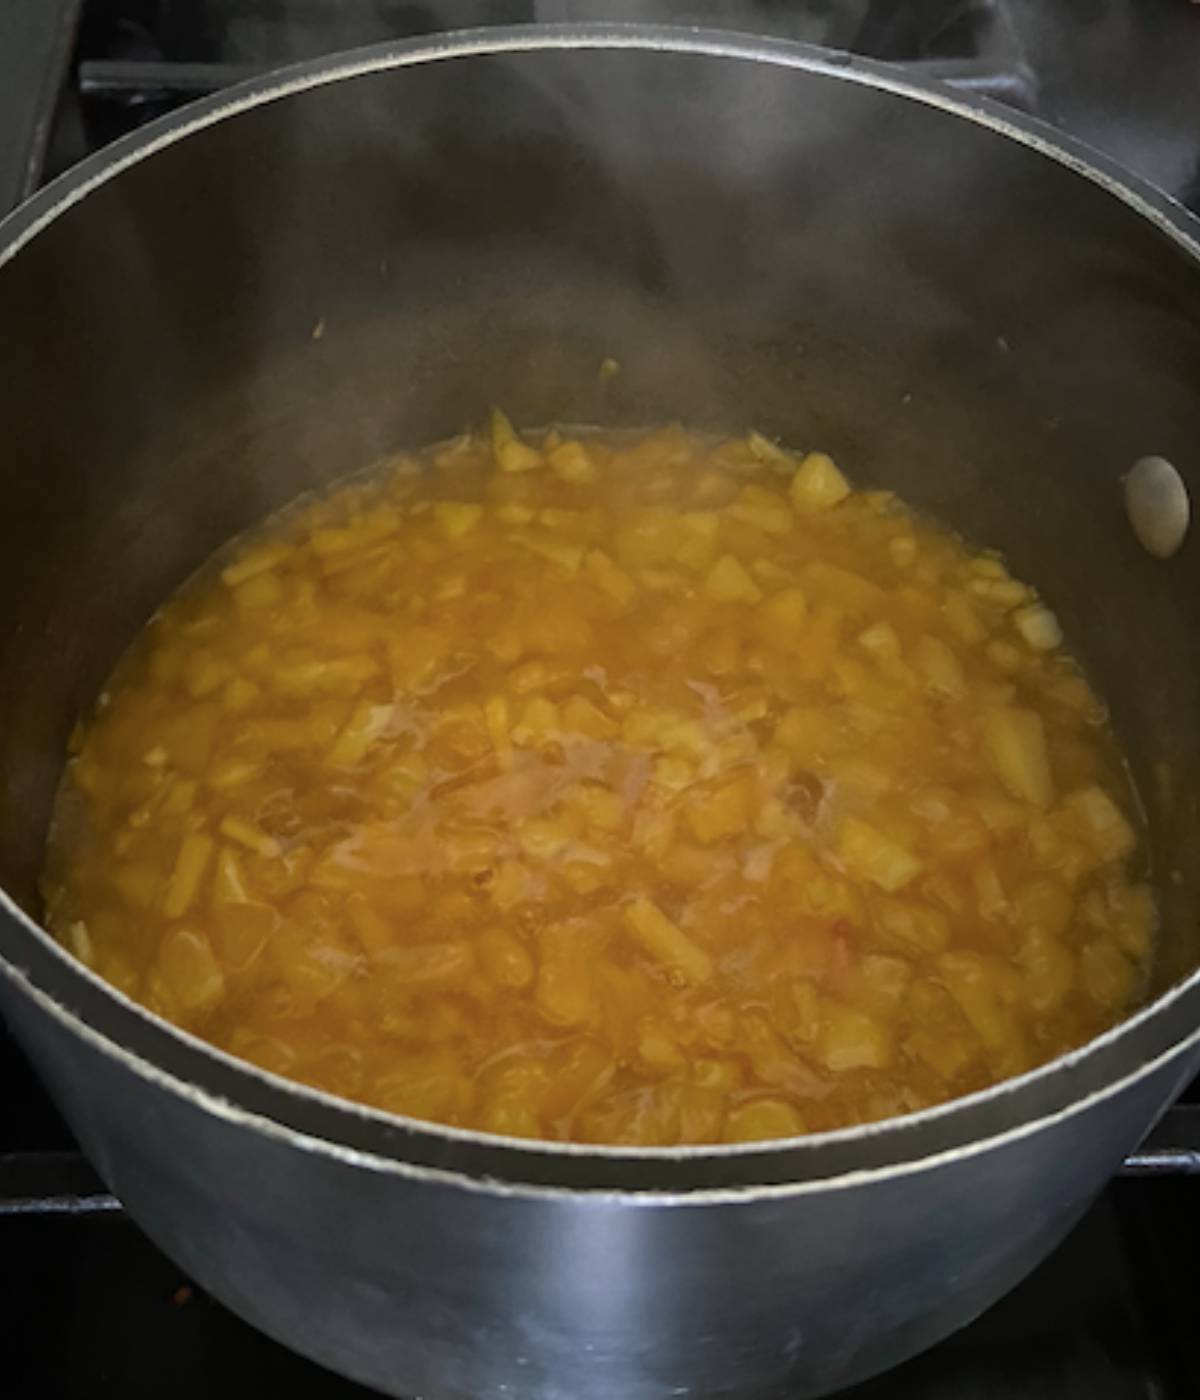 Peach mango filling cooking in pot on stovetop.